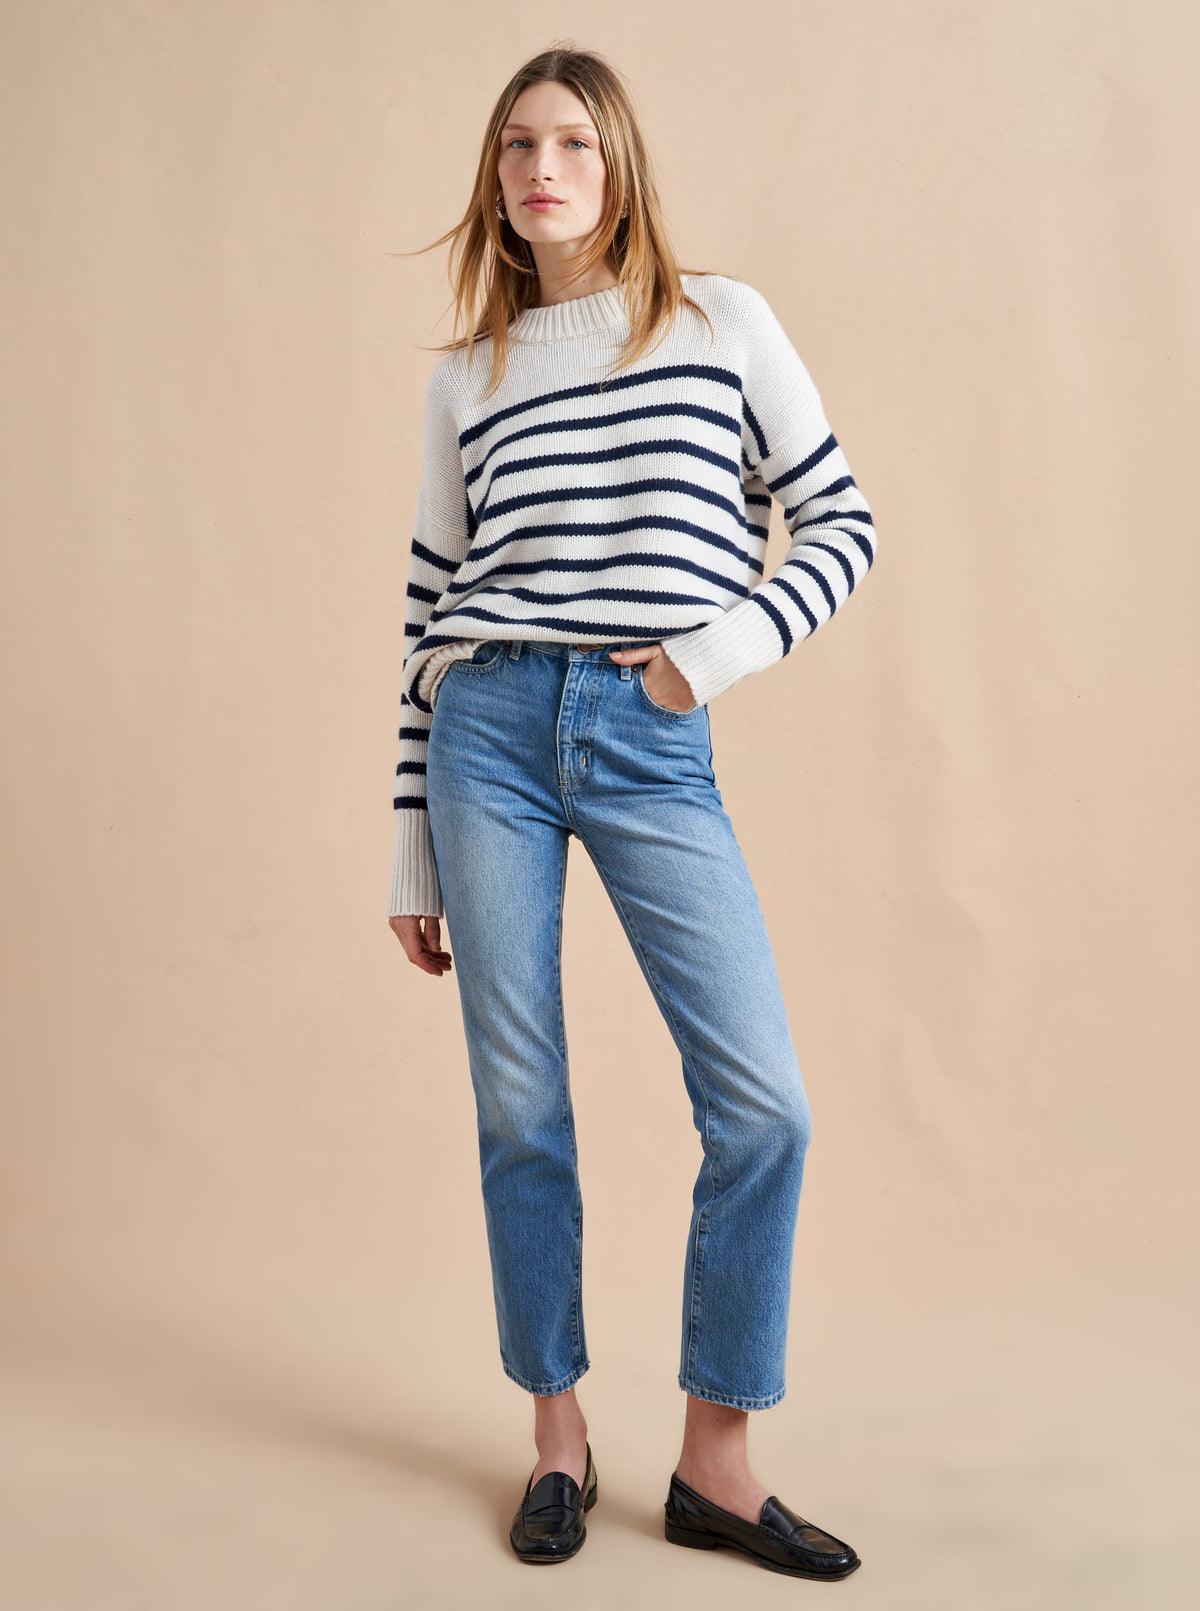 Get on board with our cream with navy stripe 7-ply wool-cashmere sweater. Comfort and style, not mutually exclusive.